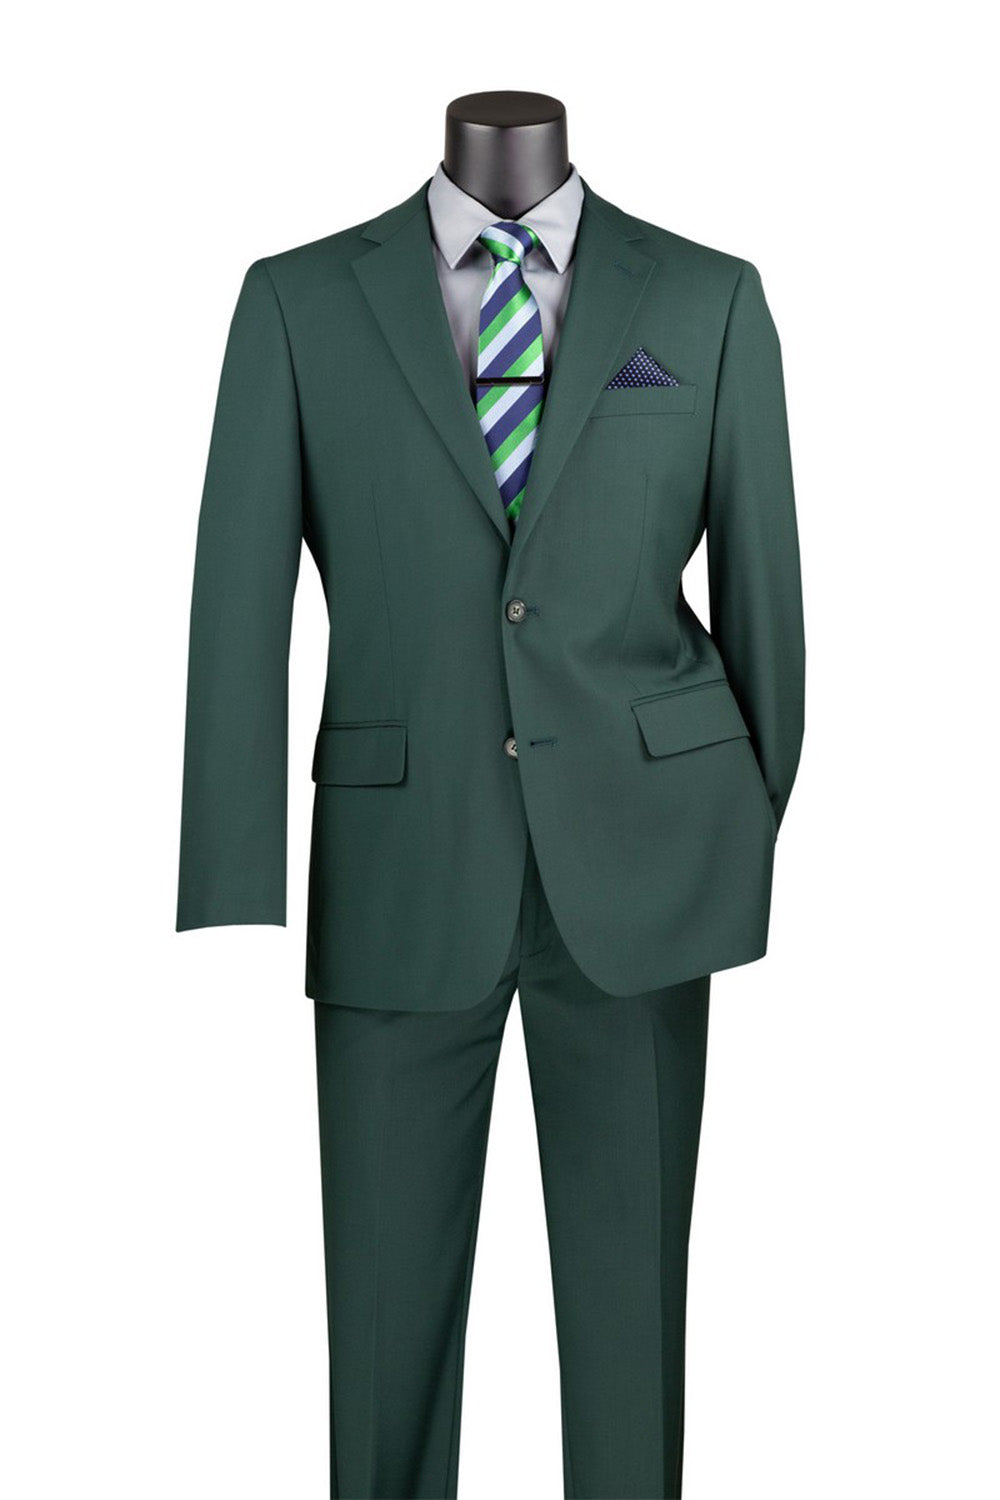 Nola Collection - Hunter Green Regular Fit 2 Piece Suit Flat Front Pants with 2″ Elastic Waist Band